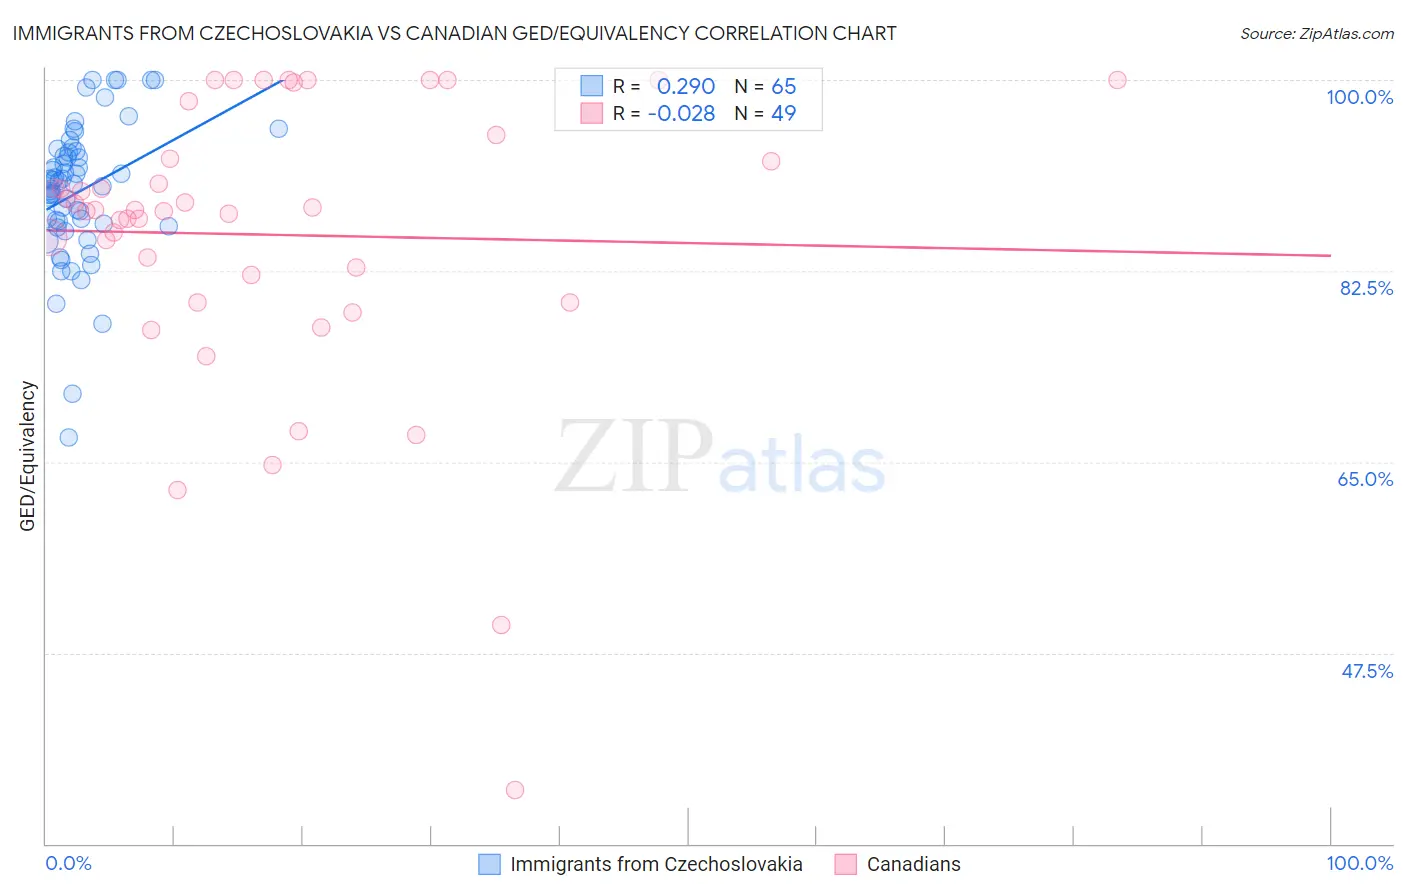 Immigrants from Czechoslovakia vs Canadian GED/Equivalency